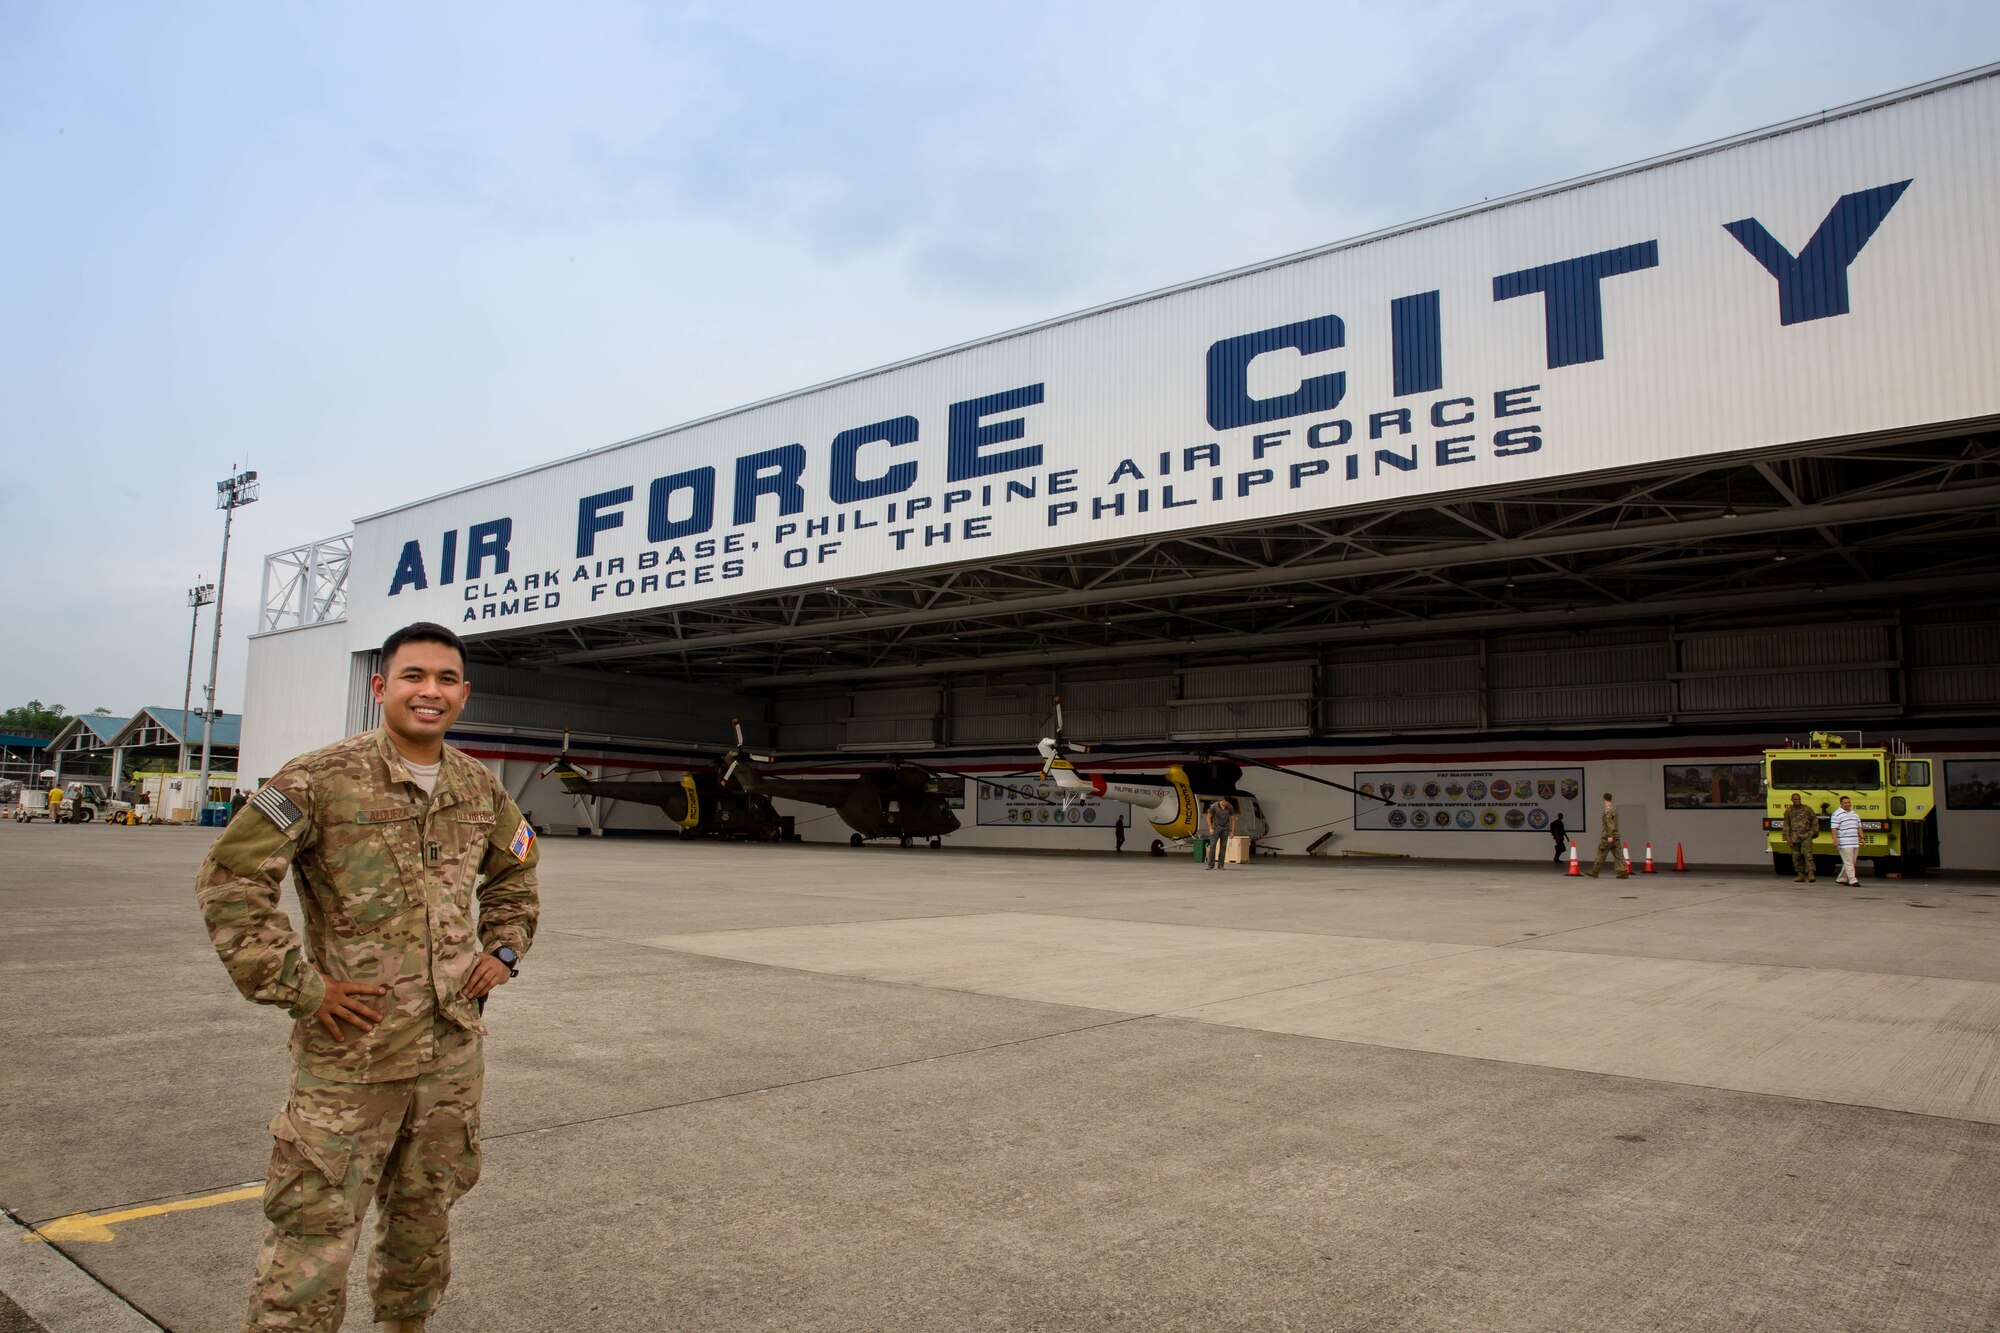 Capt. Patterson Aldueza stands in front of one of the hangars of Clark Air Base, Philippines, during his Language Intensive Training Event.